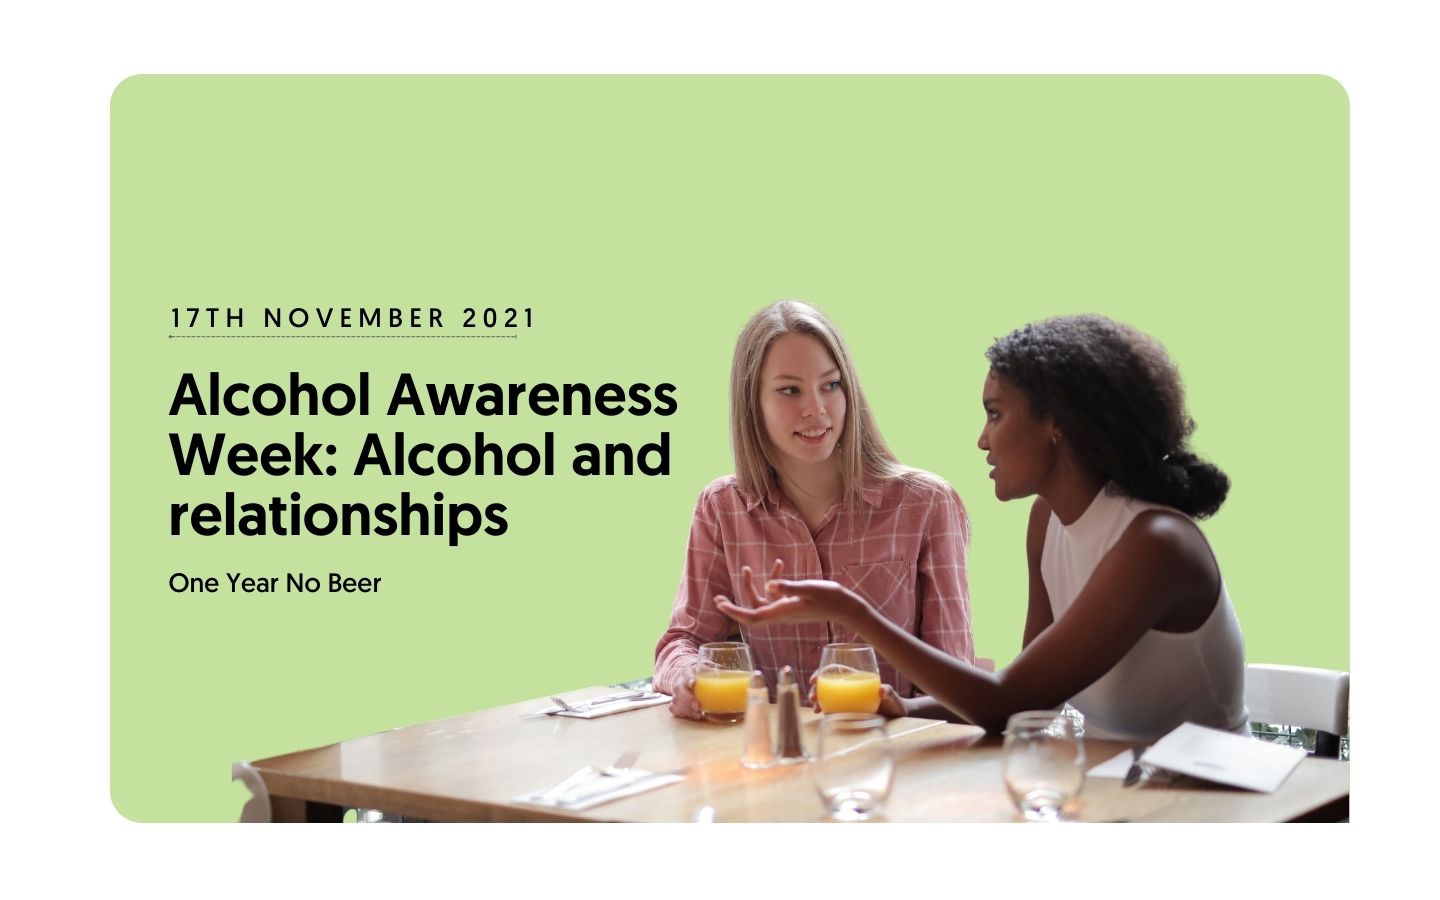 Alcohol Awareness Week: Alcohol and relationships